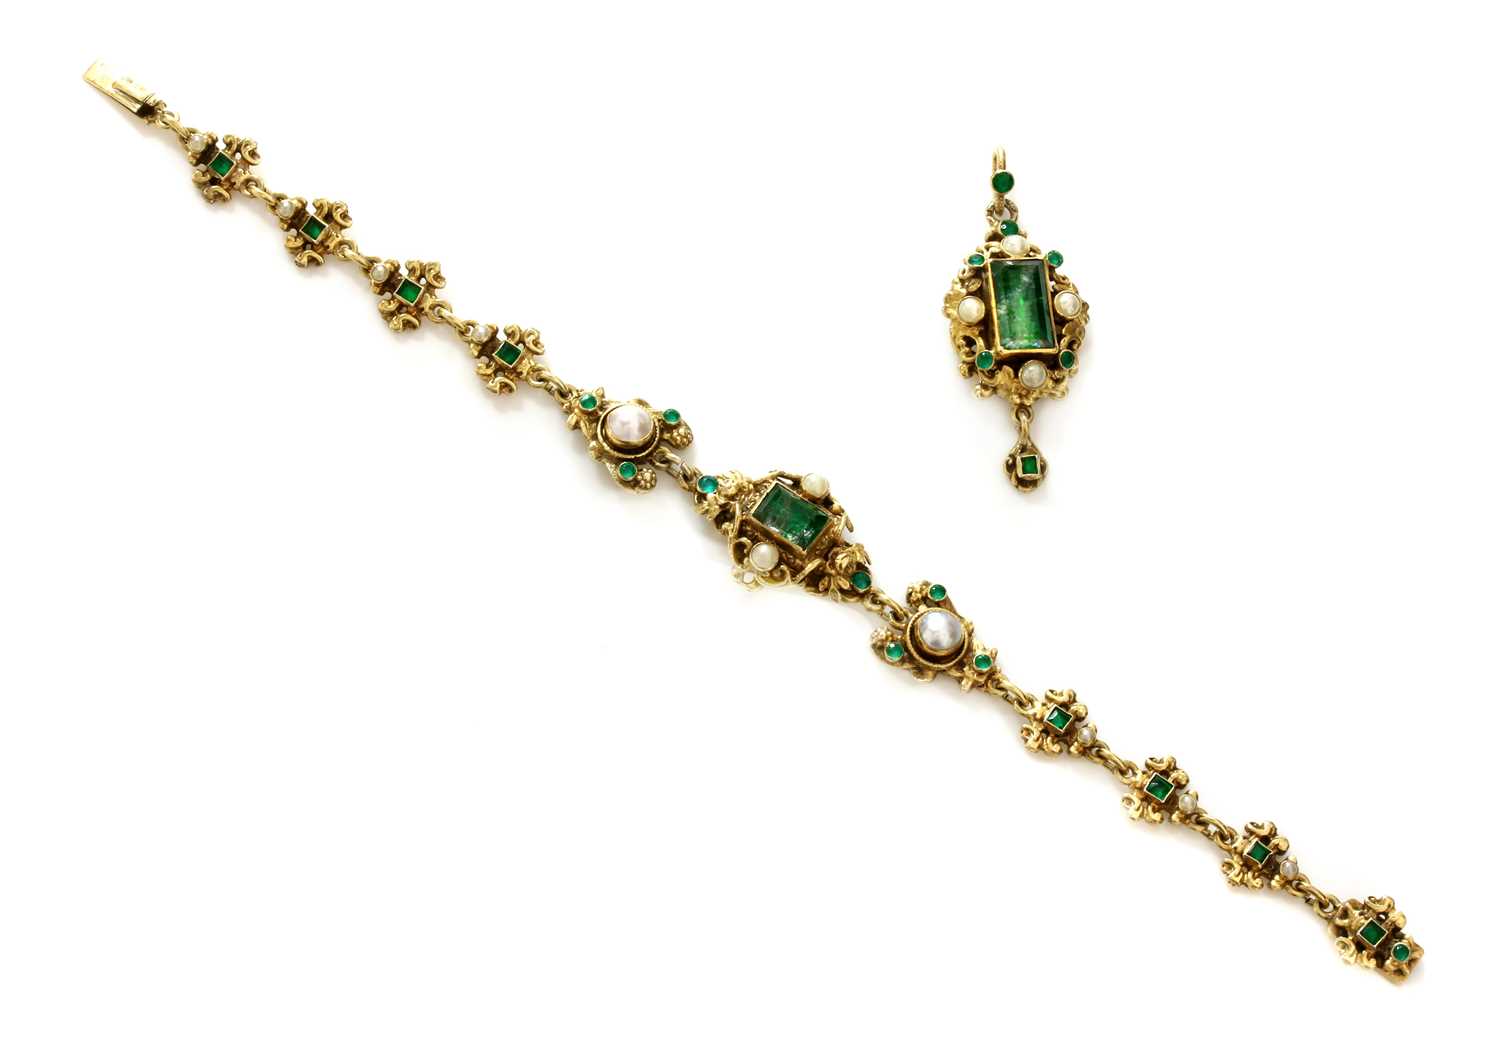 Lot 118 - An Austro-Hungarian, silver gilt, foiled gemstone and blister pearl bracelet and pendant, c.1900